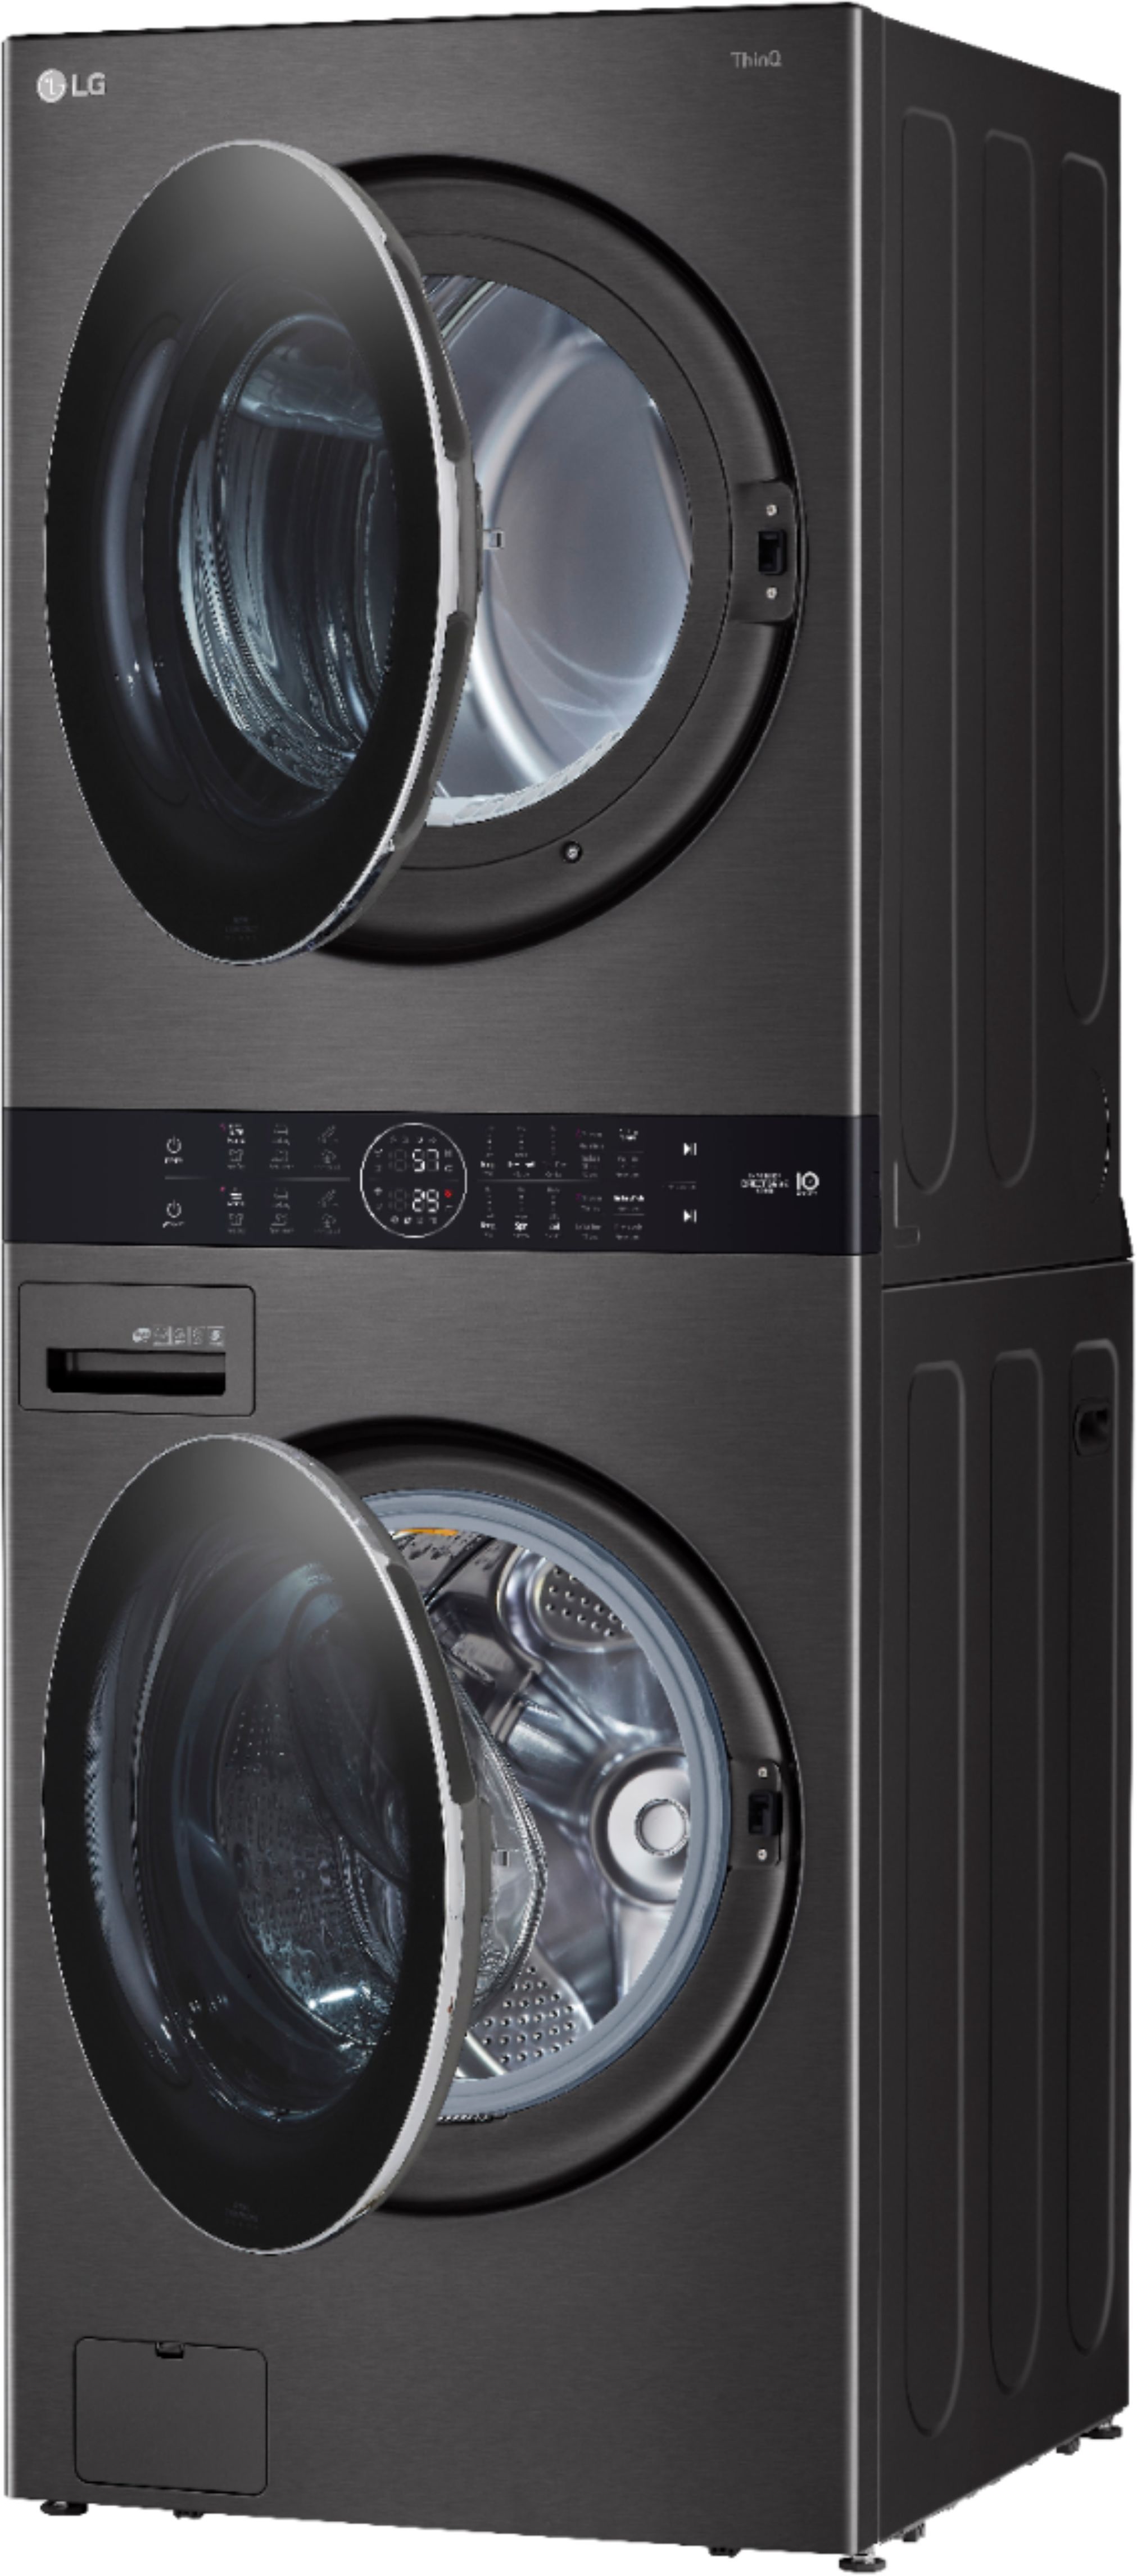 Buy Cu. Smart Cu. Best - Steel Electric Intelligence with Built-In LG Washer Ft. Ft. WashTower Front Dryer 7.4 Black Steam Load WKEX200HBA and and HE 4.5